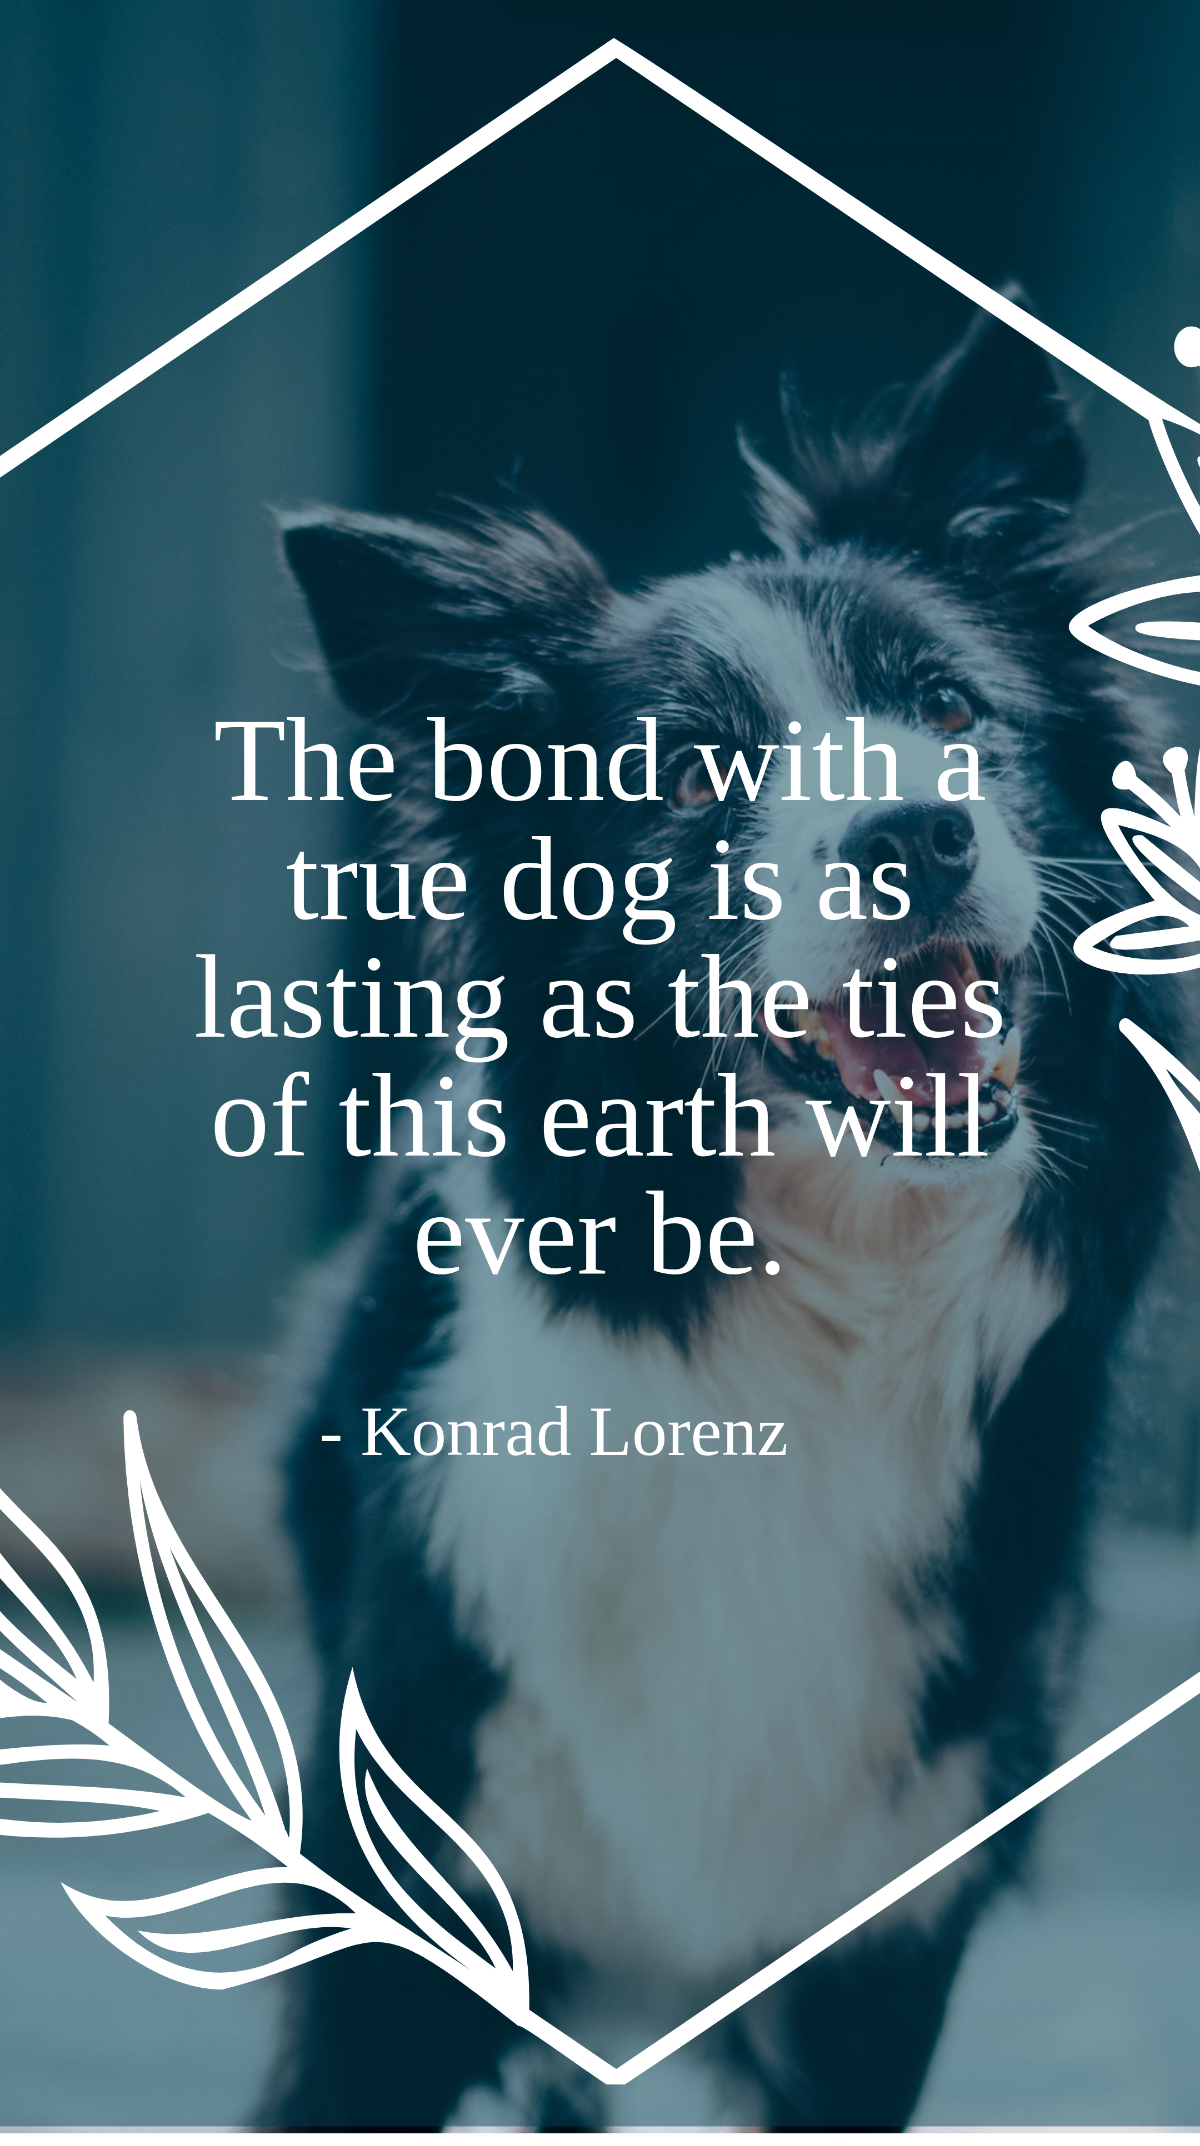 Konrad Lorenz - The bond with a true dog is as lasting as the ties of this earth will ever be. Template